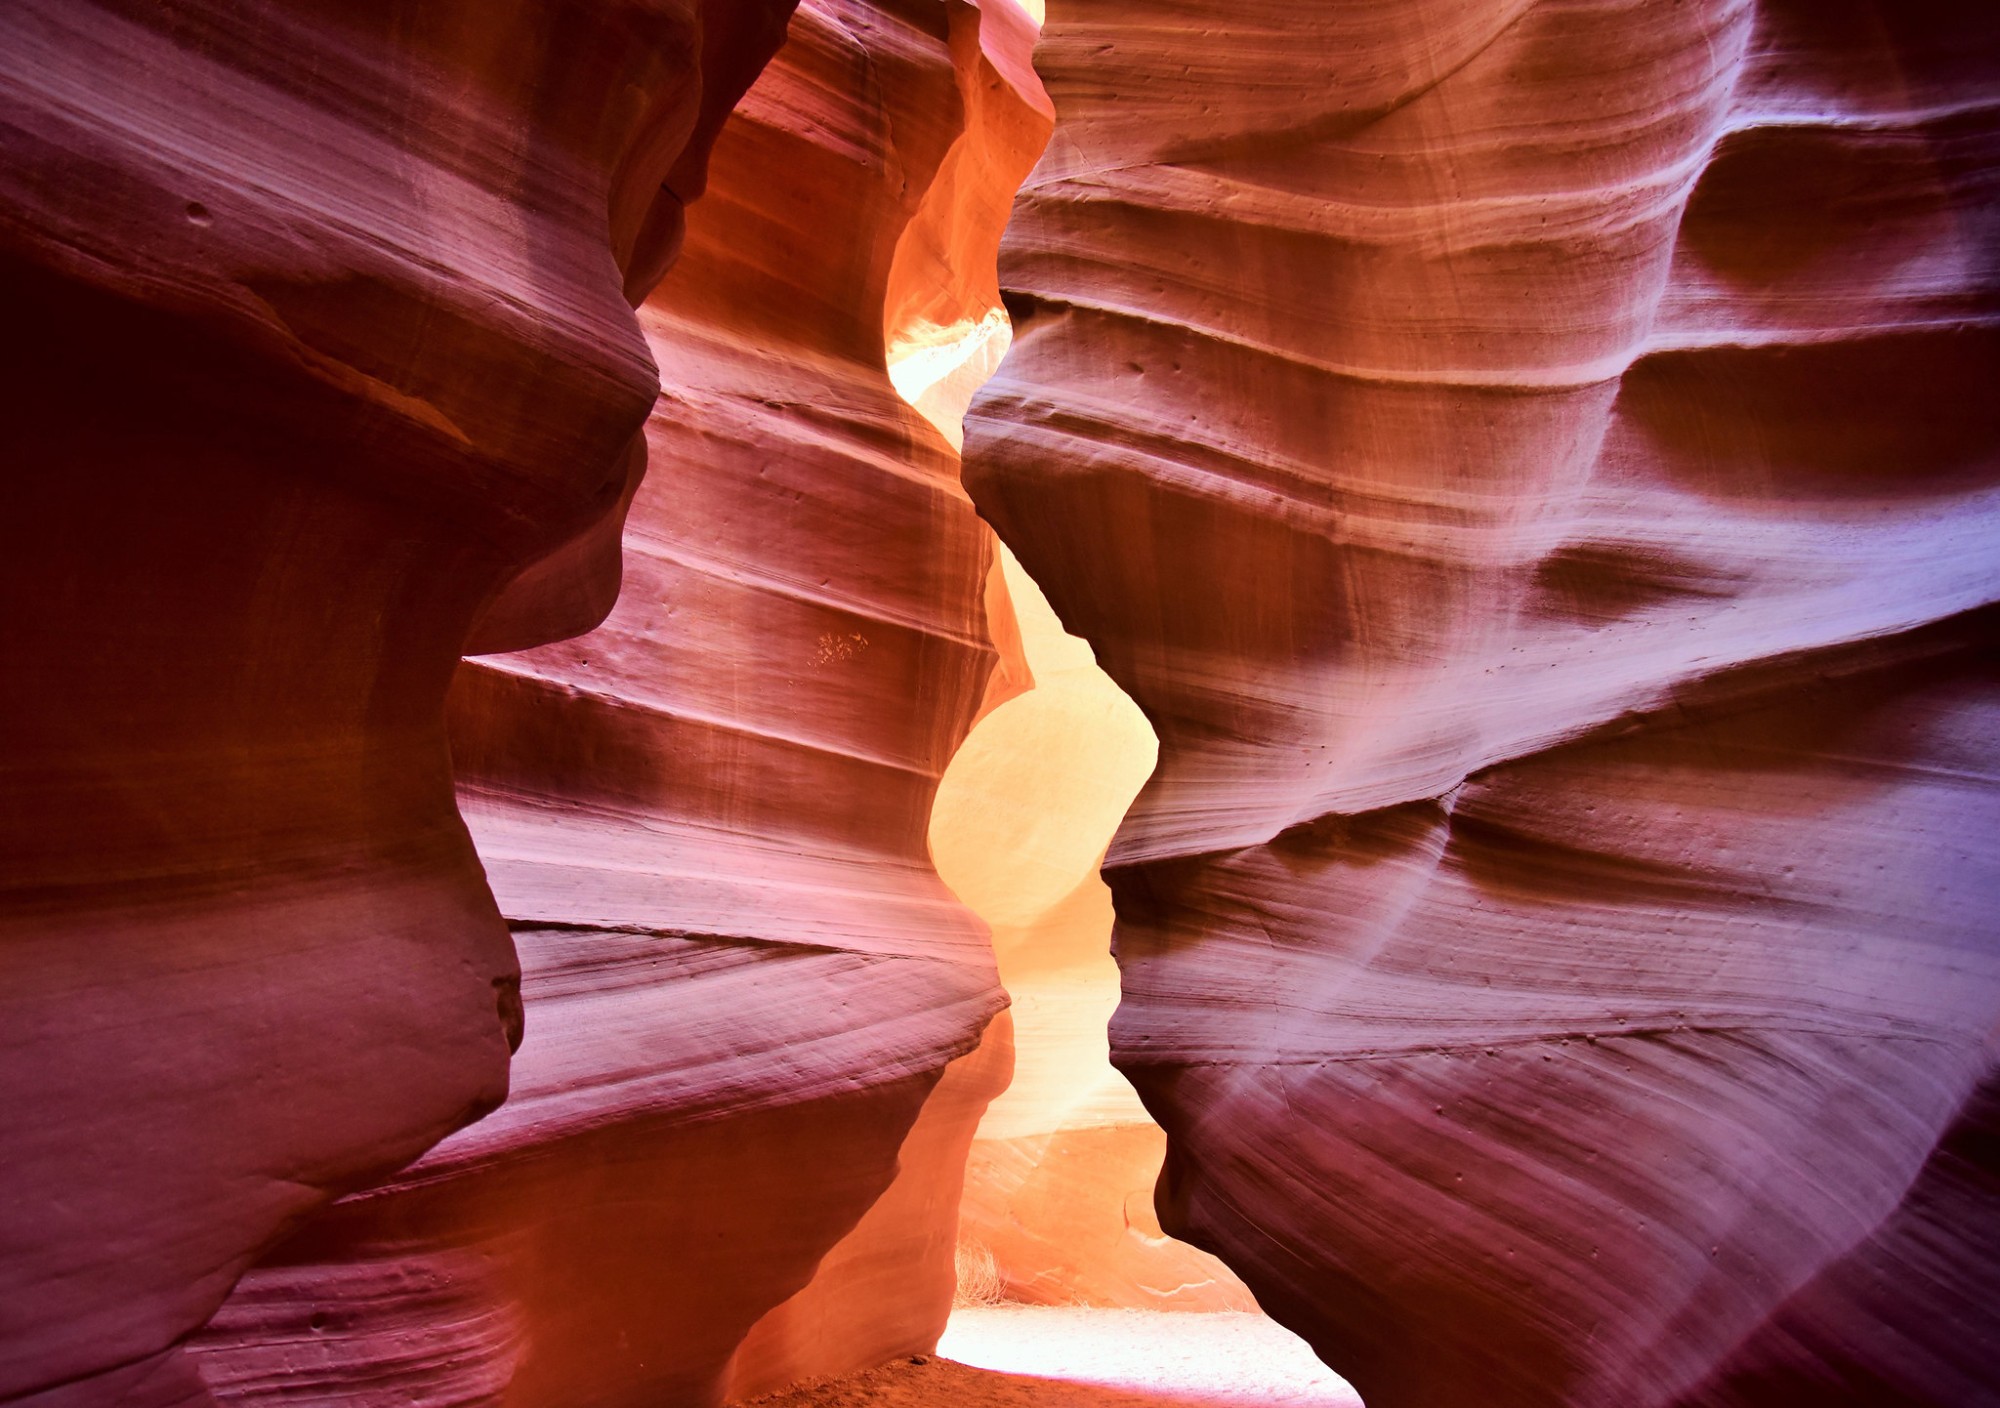 Antelope Canyon, a mesmerizing slot canyon in Arizona's Southwest, demonstrates nature's artistry. Carved from Navajo Sandstone over millennia, it draws global visitors to its stunning formations and play of light. Renowned for its beauty and rich history, it continues to captivate with its wave-like patterns and towering walls.